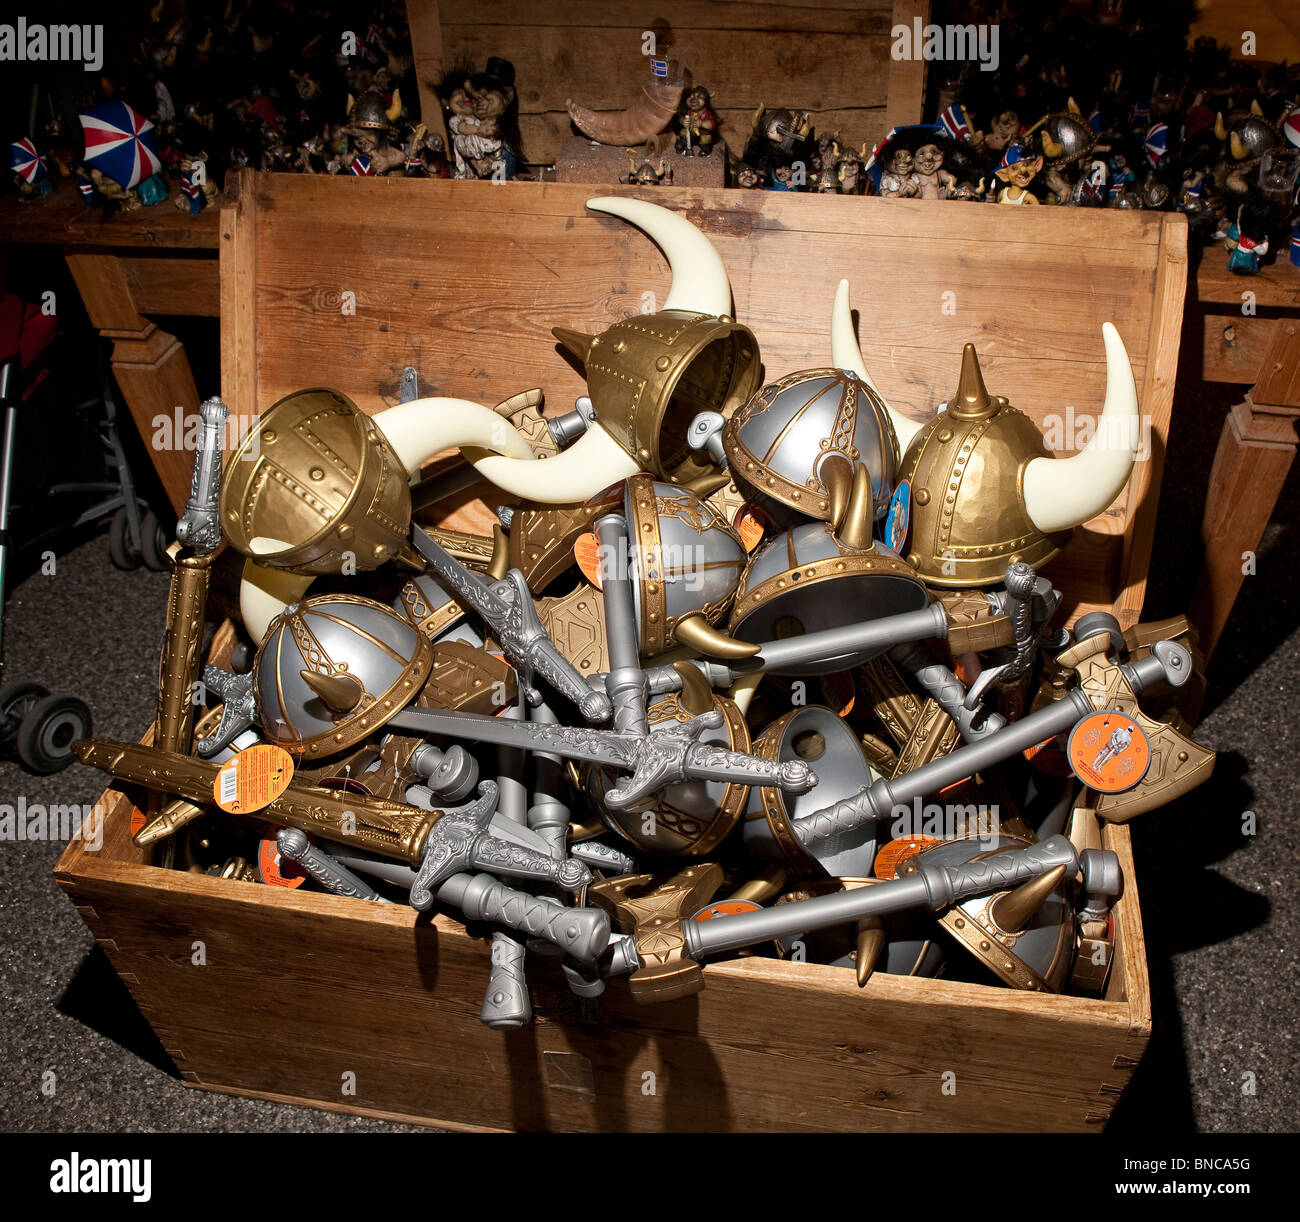 Viking swords and helmets for dress-up, Iceland Stock Photo